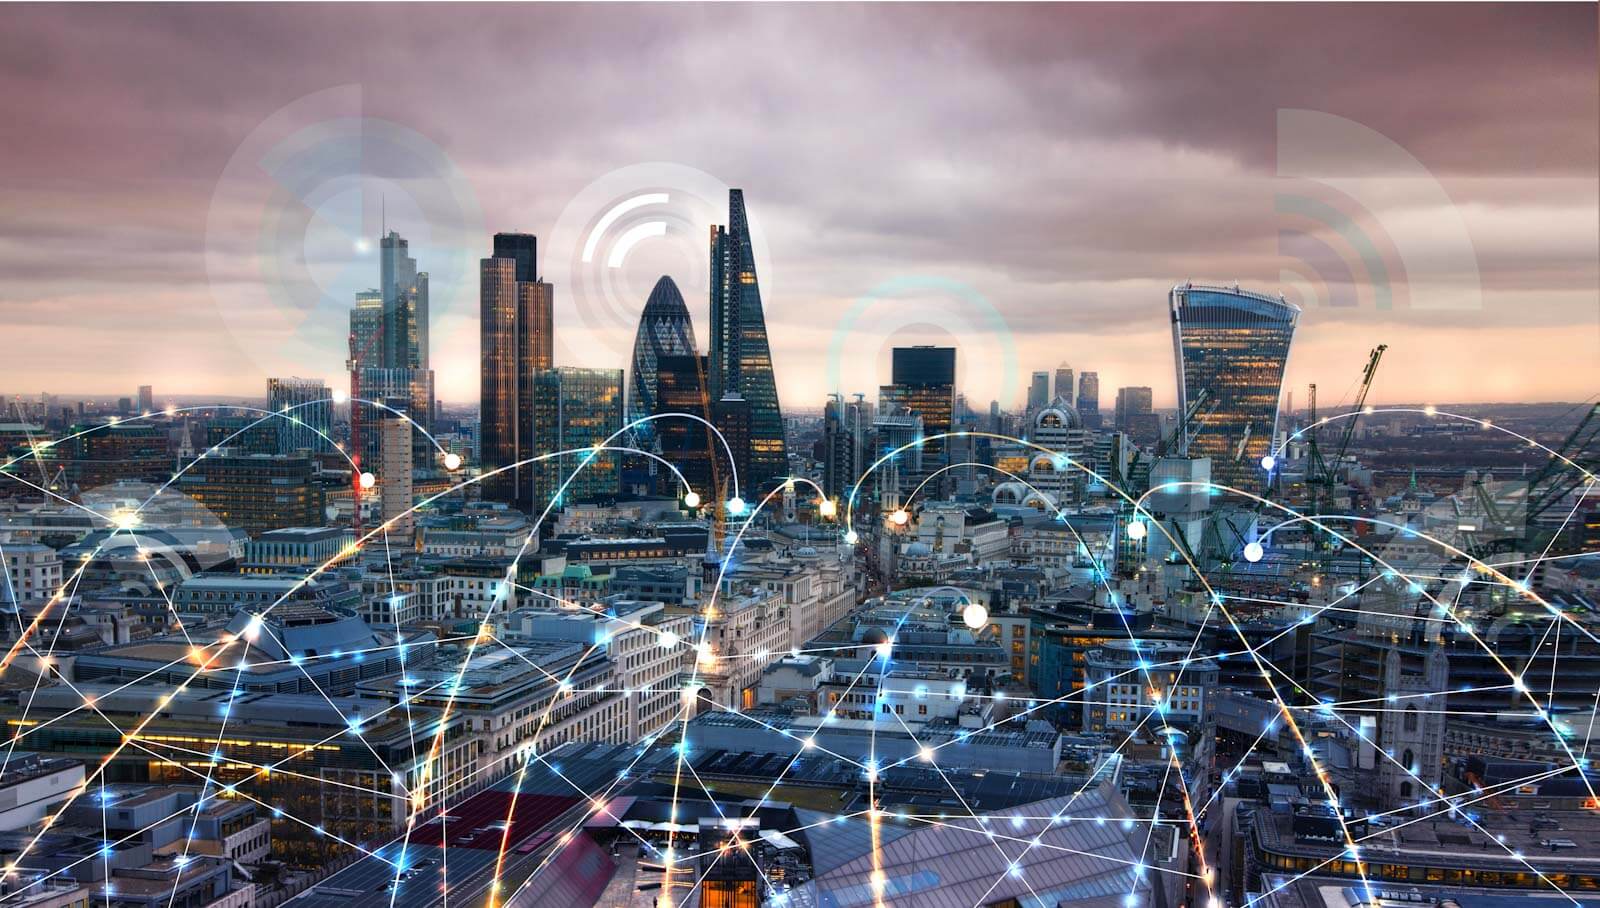 Connected city with broadband and utility services provided by smartflex